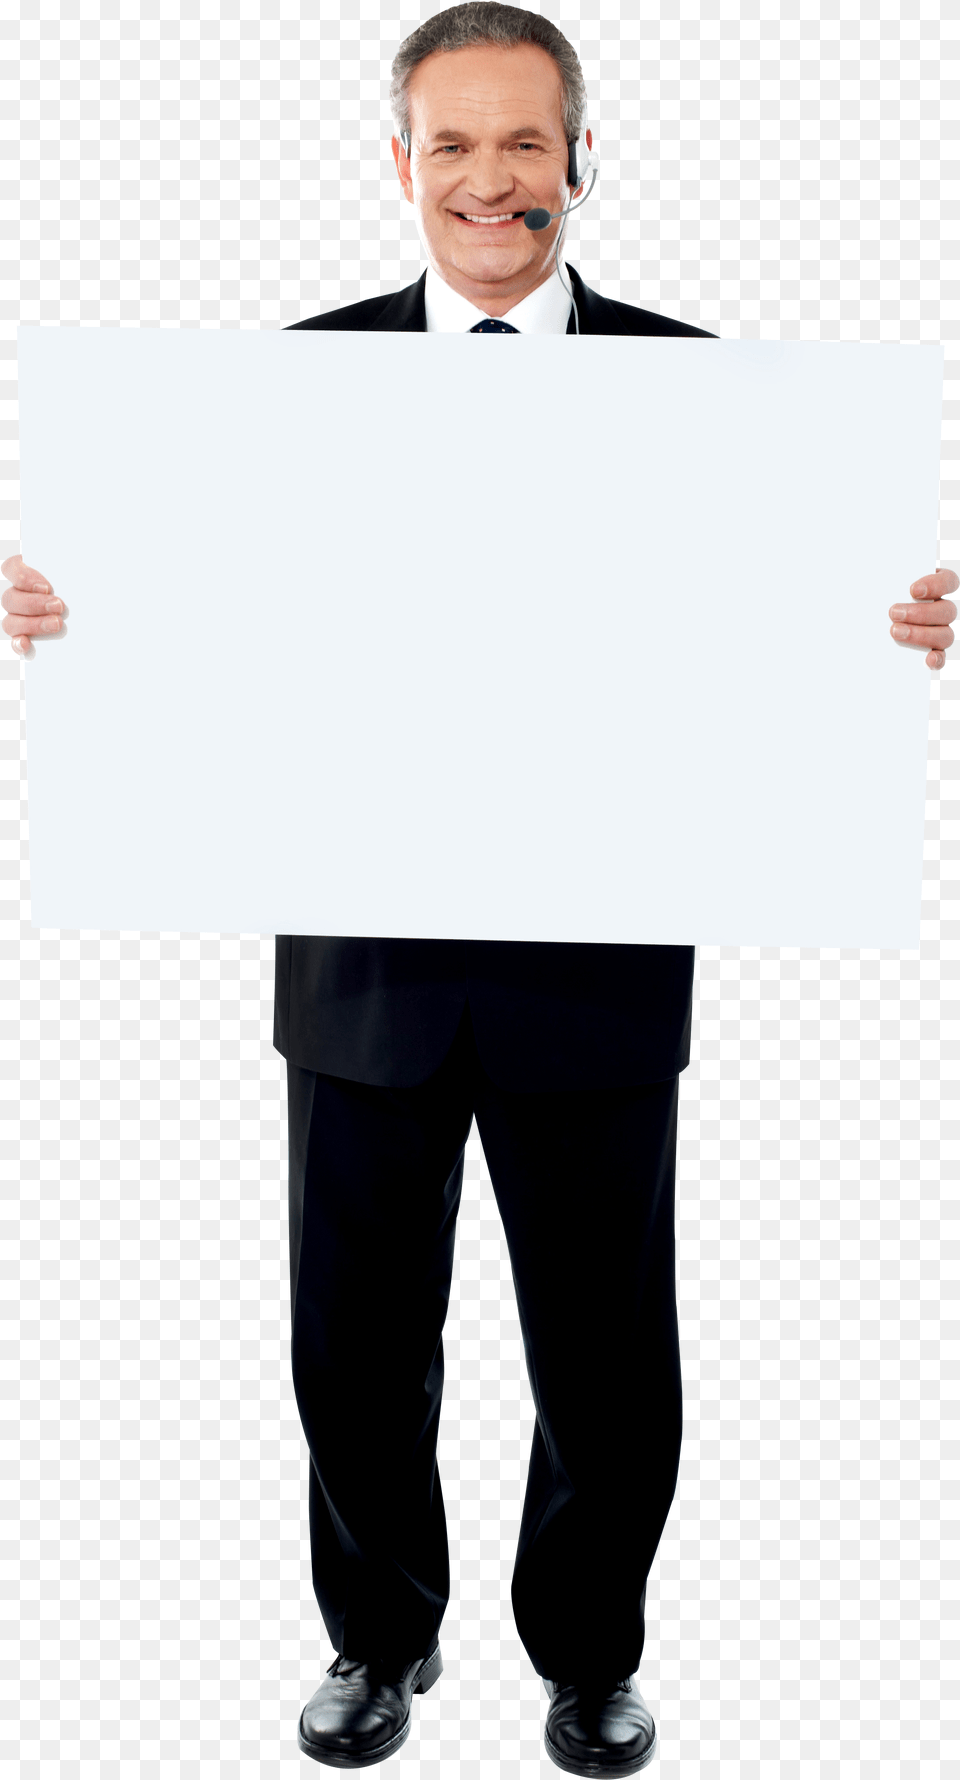 Men Holding Banner Commercial Use Images Banner Holding, Accessories, Tie, Suit, Clothing Free Transparent Png